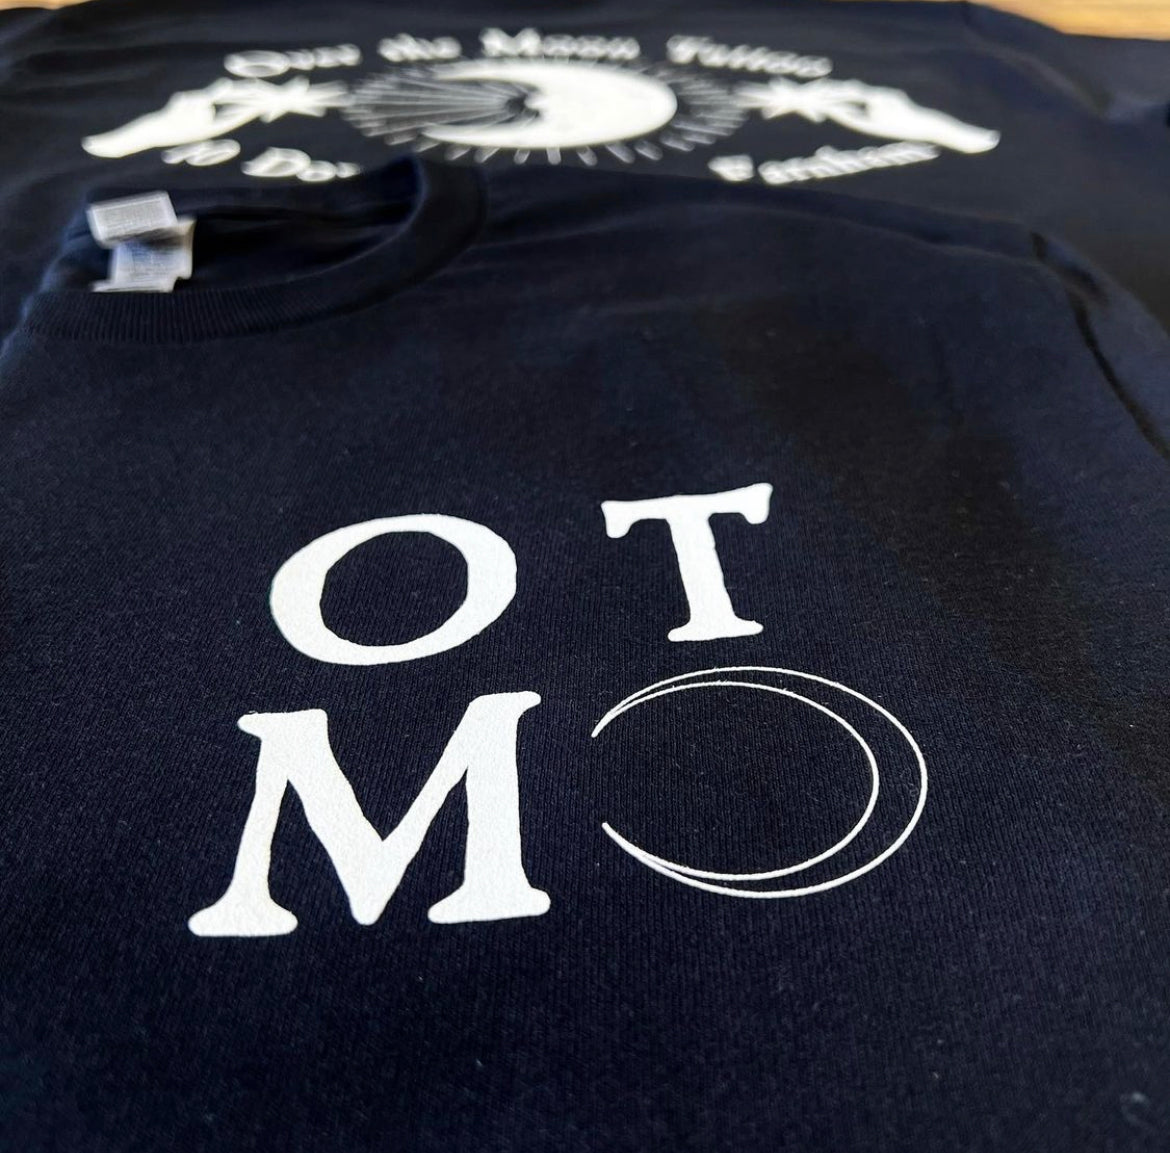 Over the Moon Logo T-Shirt